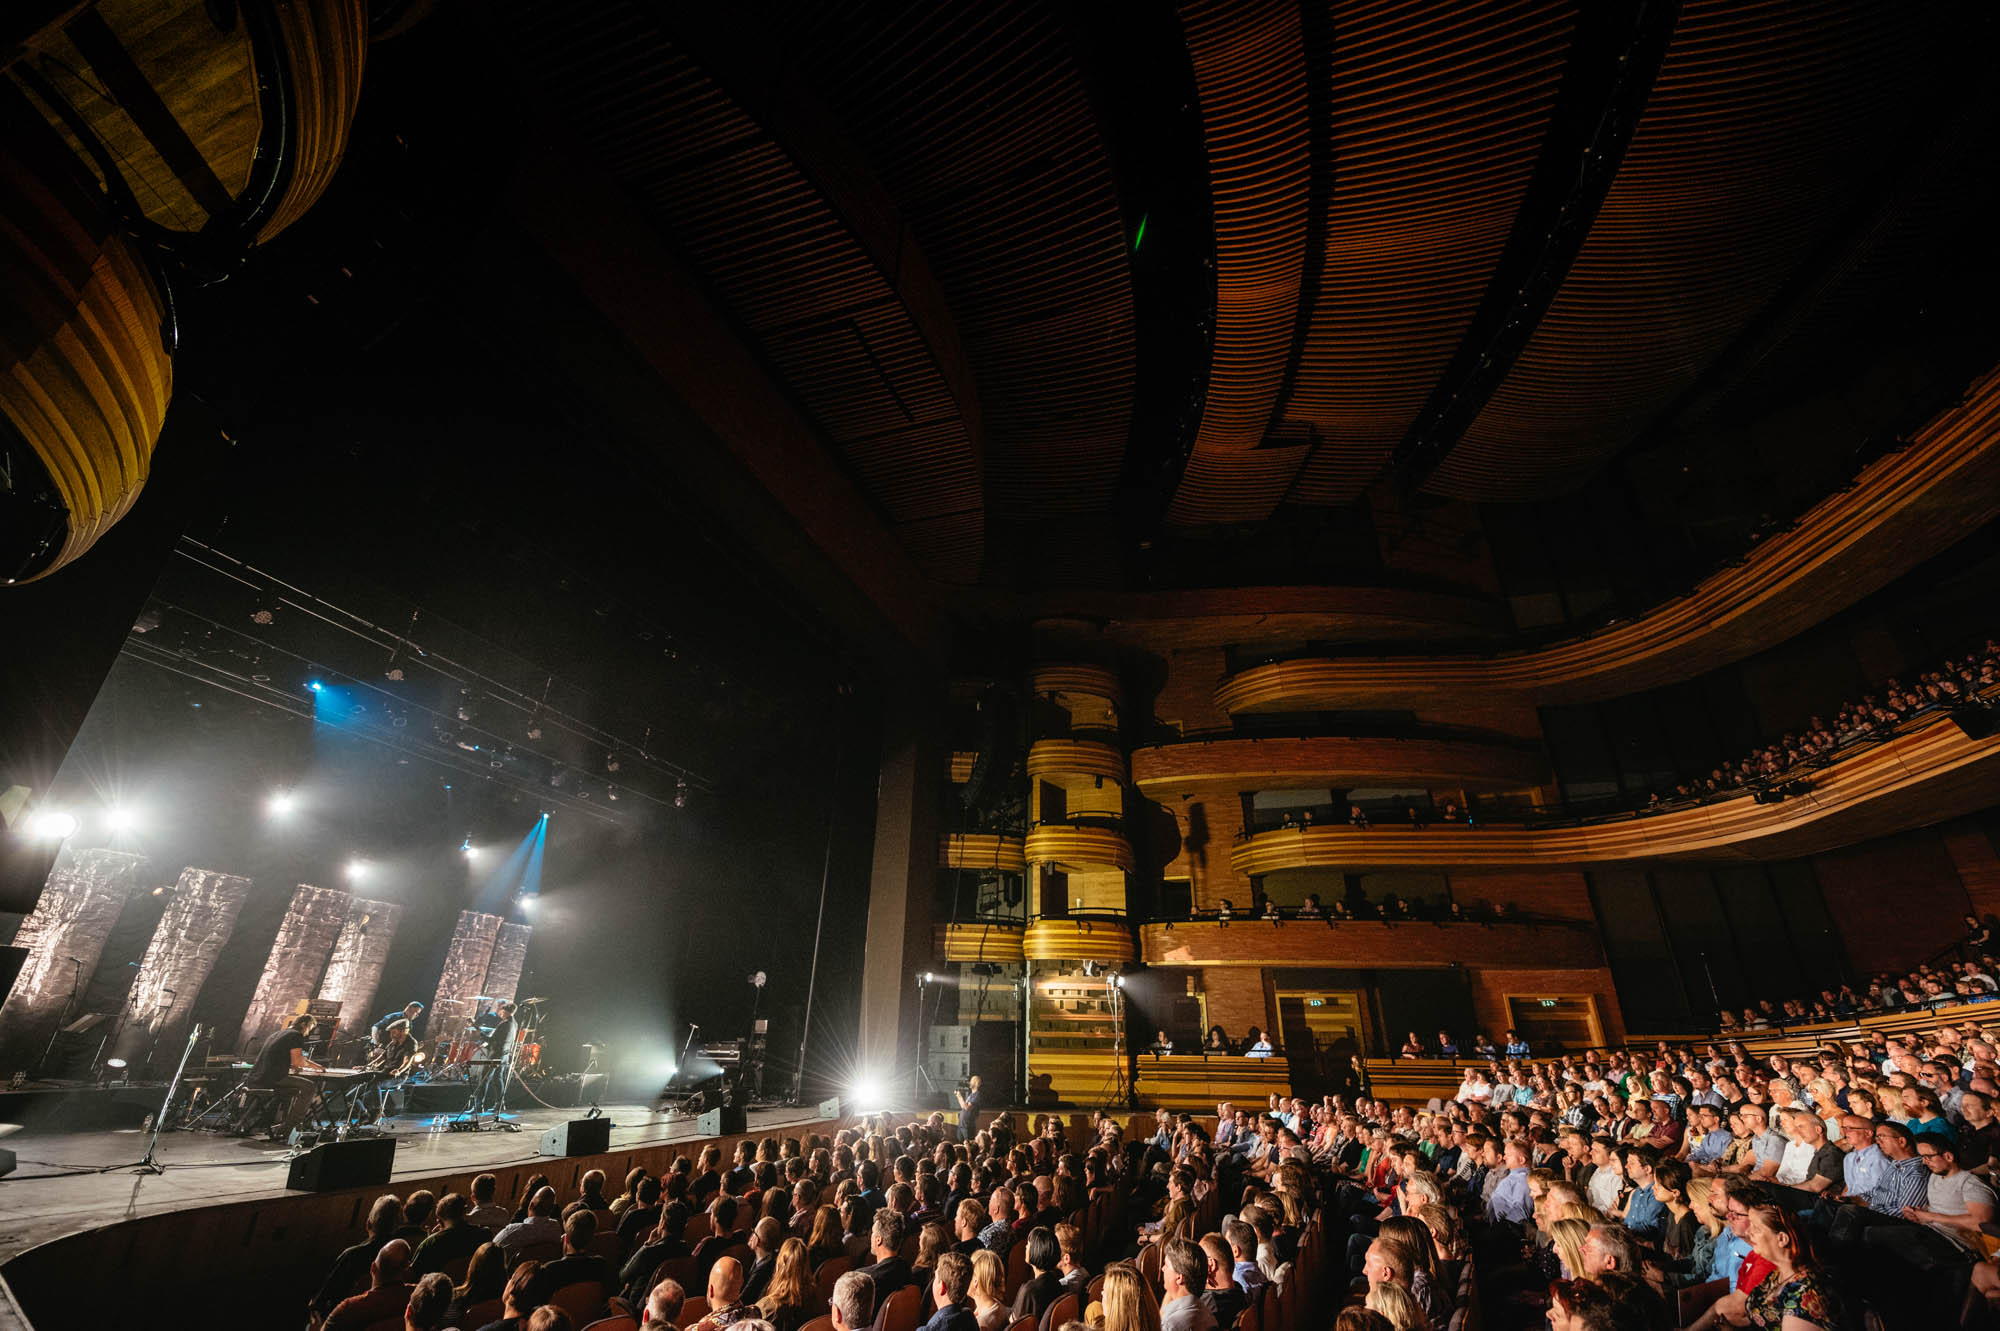 A photo of the inside of the Wales Millennium Centre Auditorium with a full house audience and stage Lighting